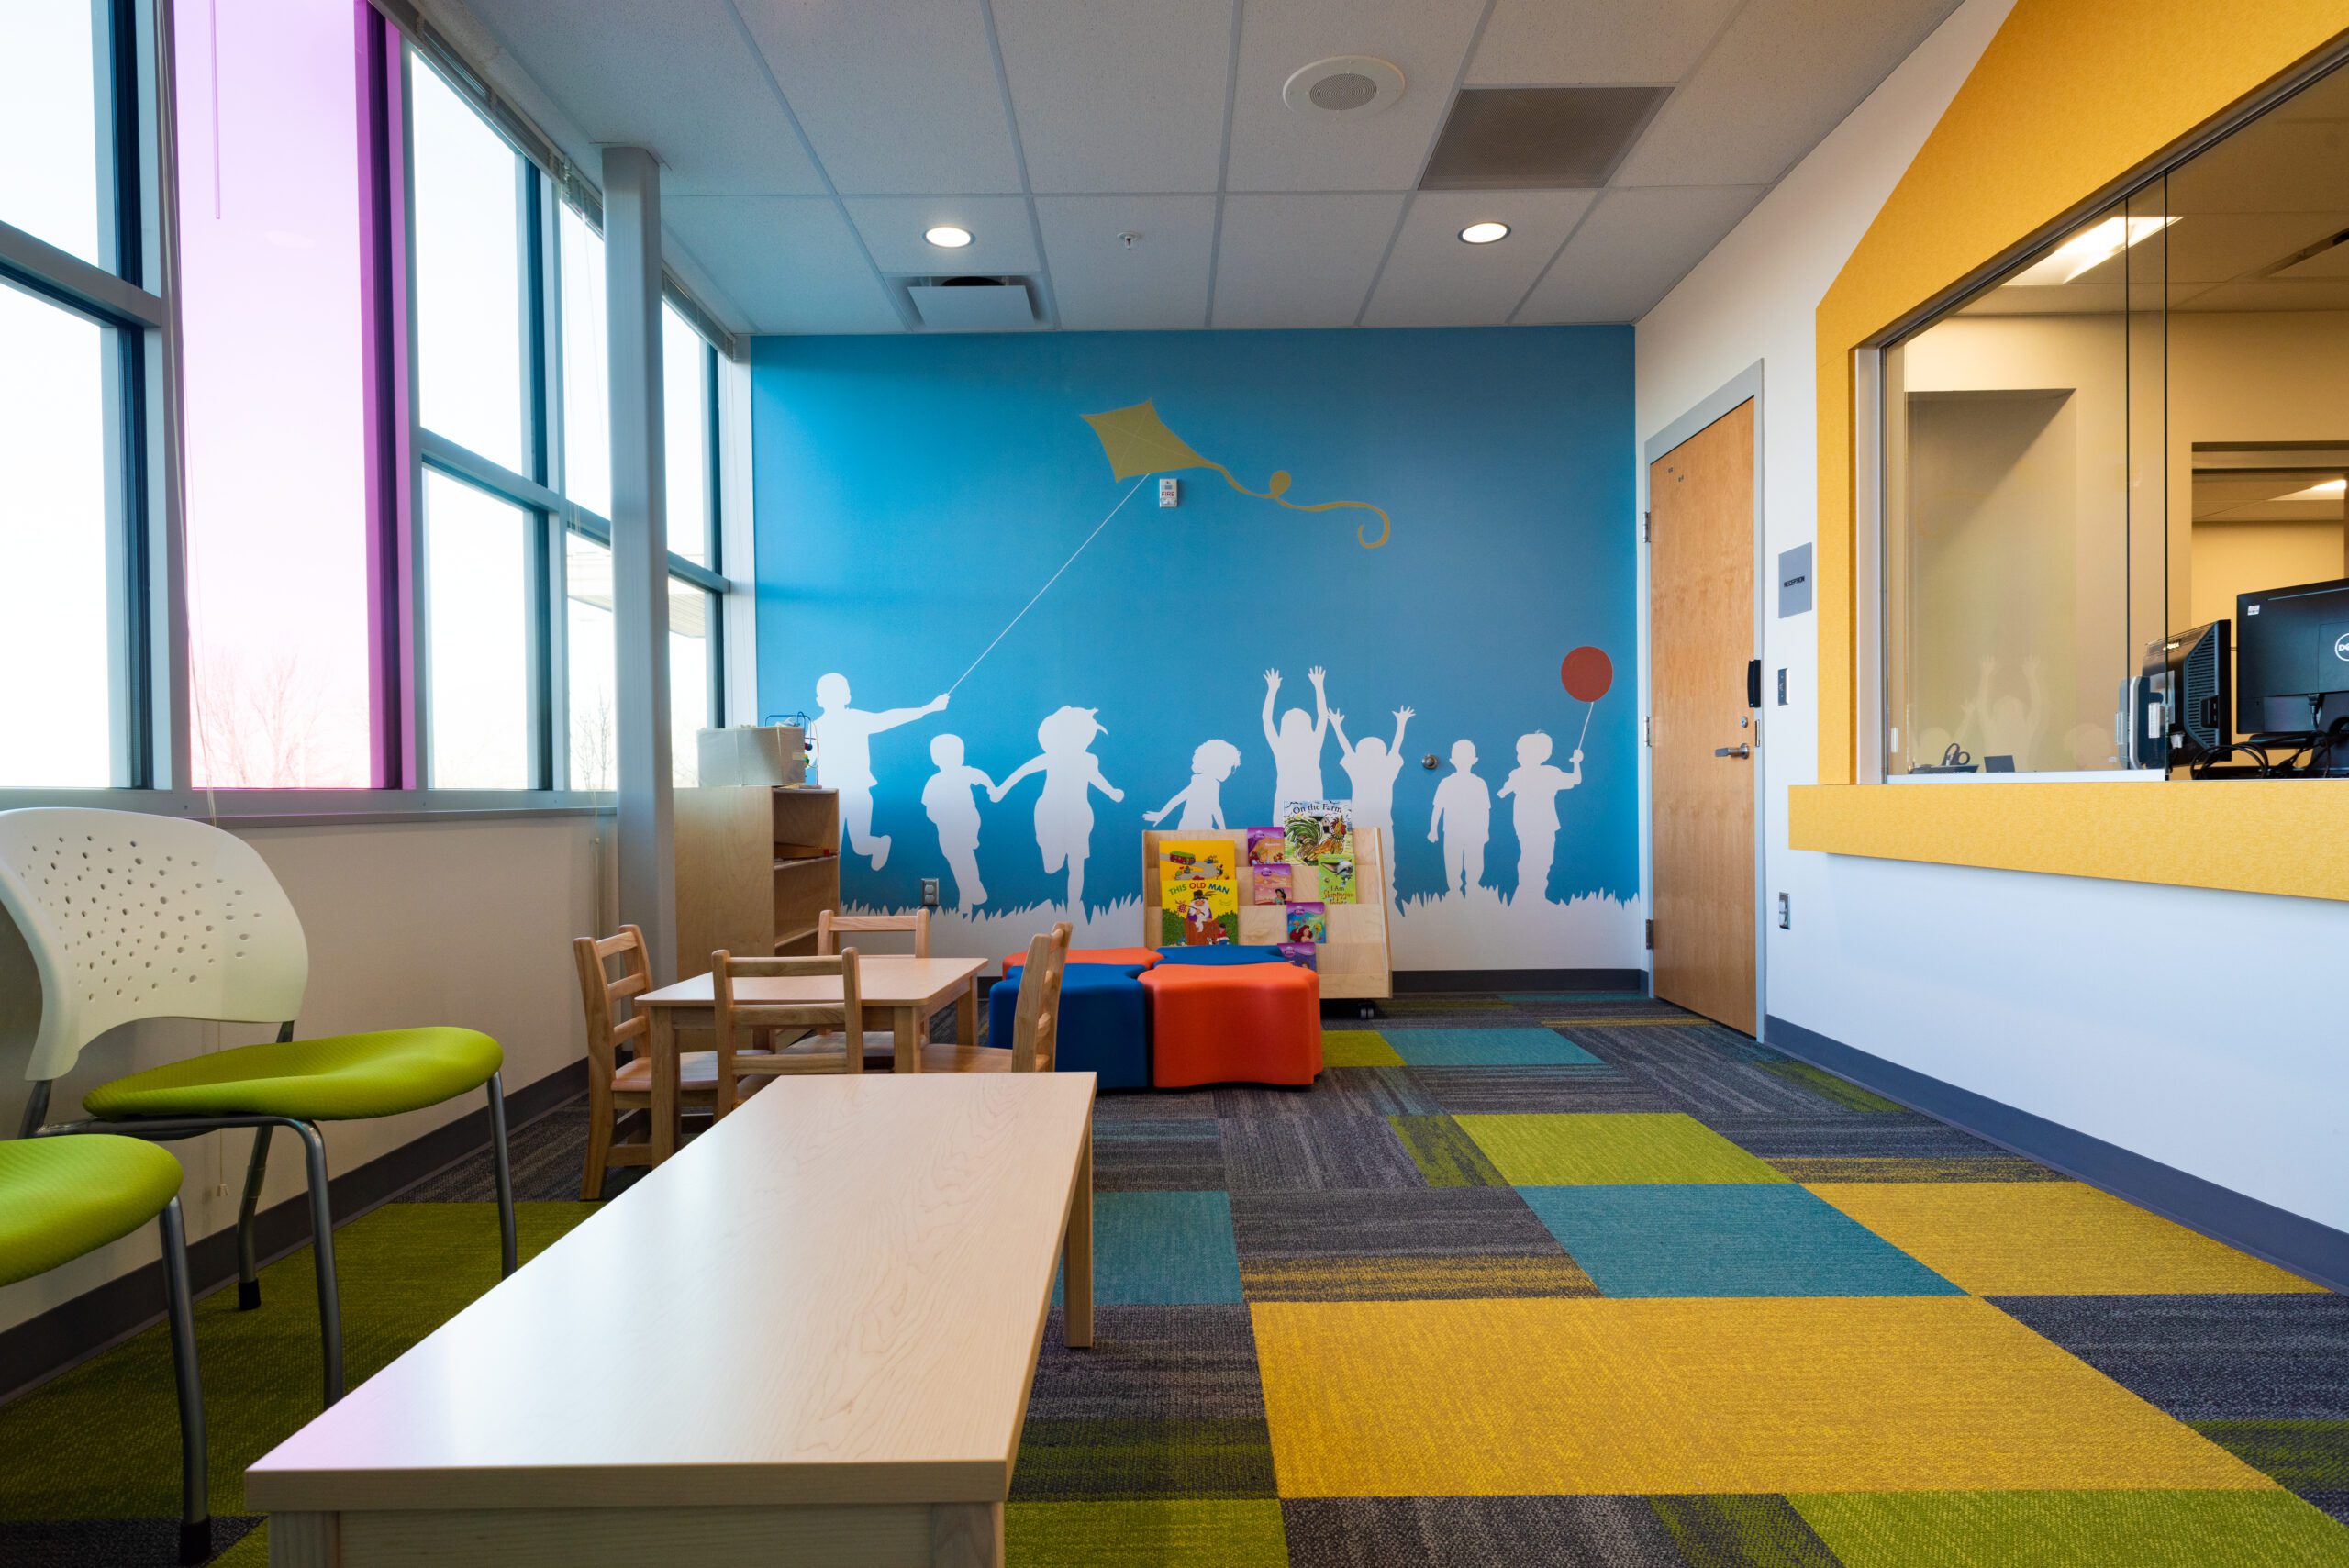 Interior of Fort Osage Early Childhood Center.